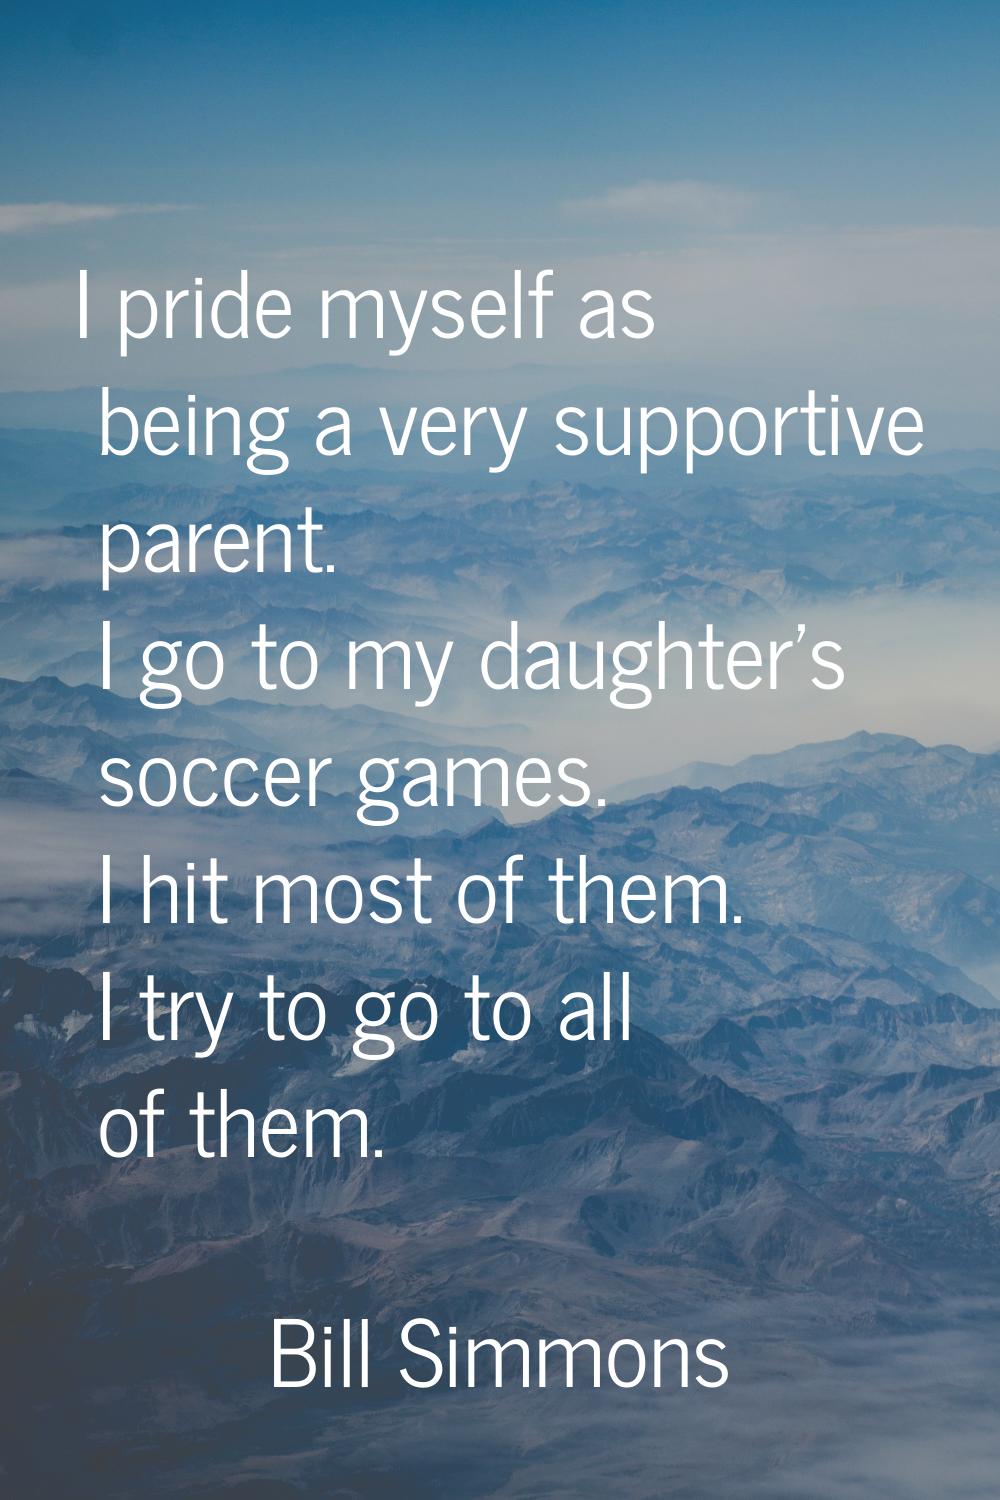 I pride myself as being a very supportive parent. I go to my daughter's soccer games. I hit most of